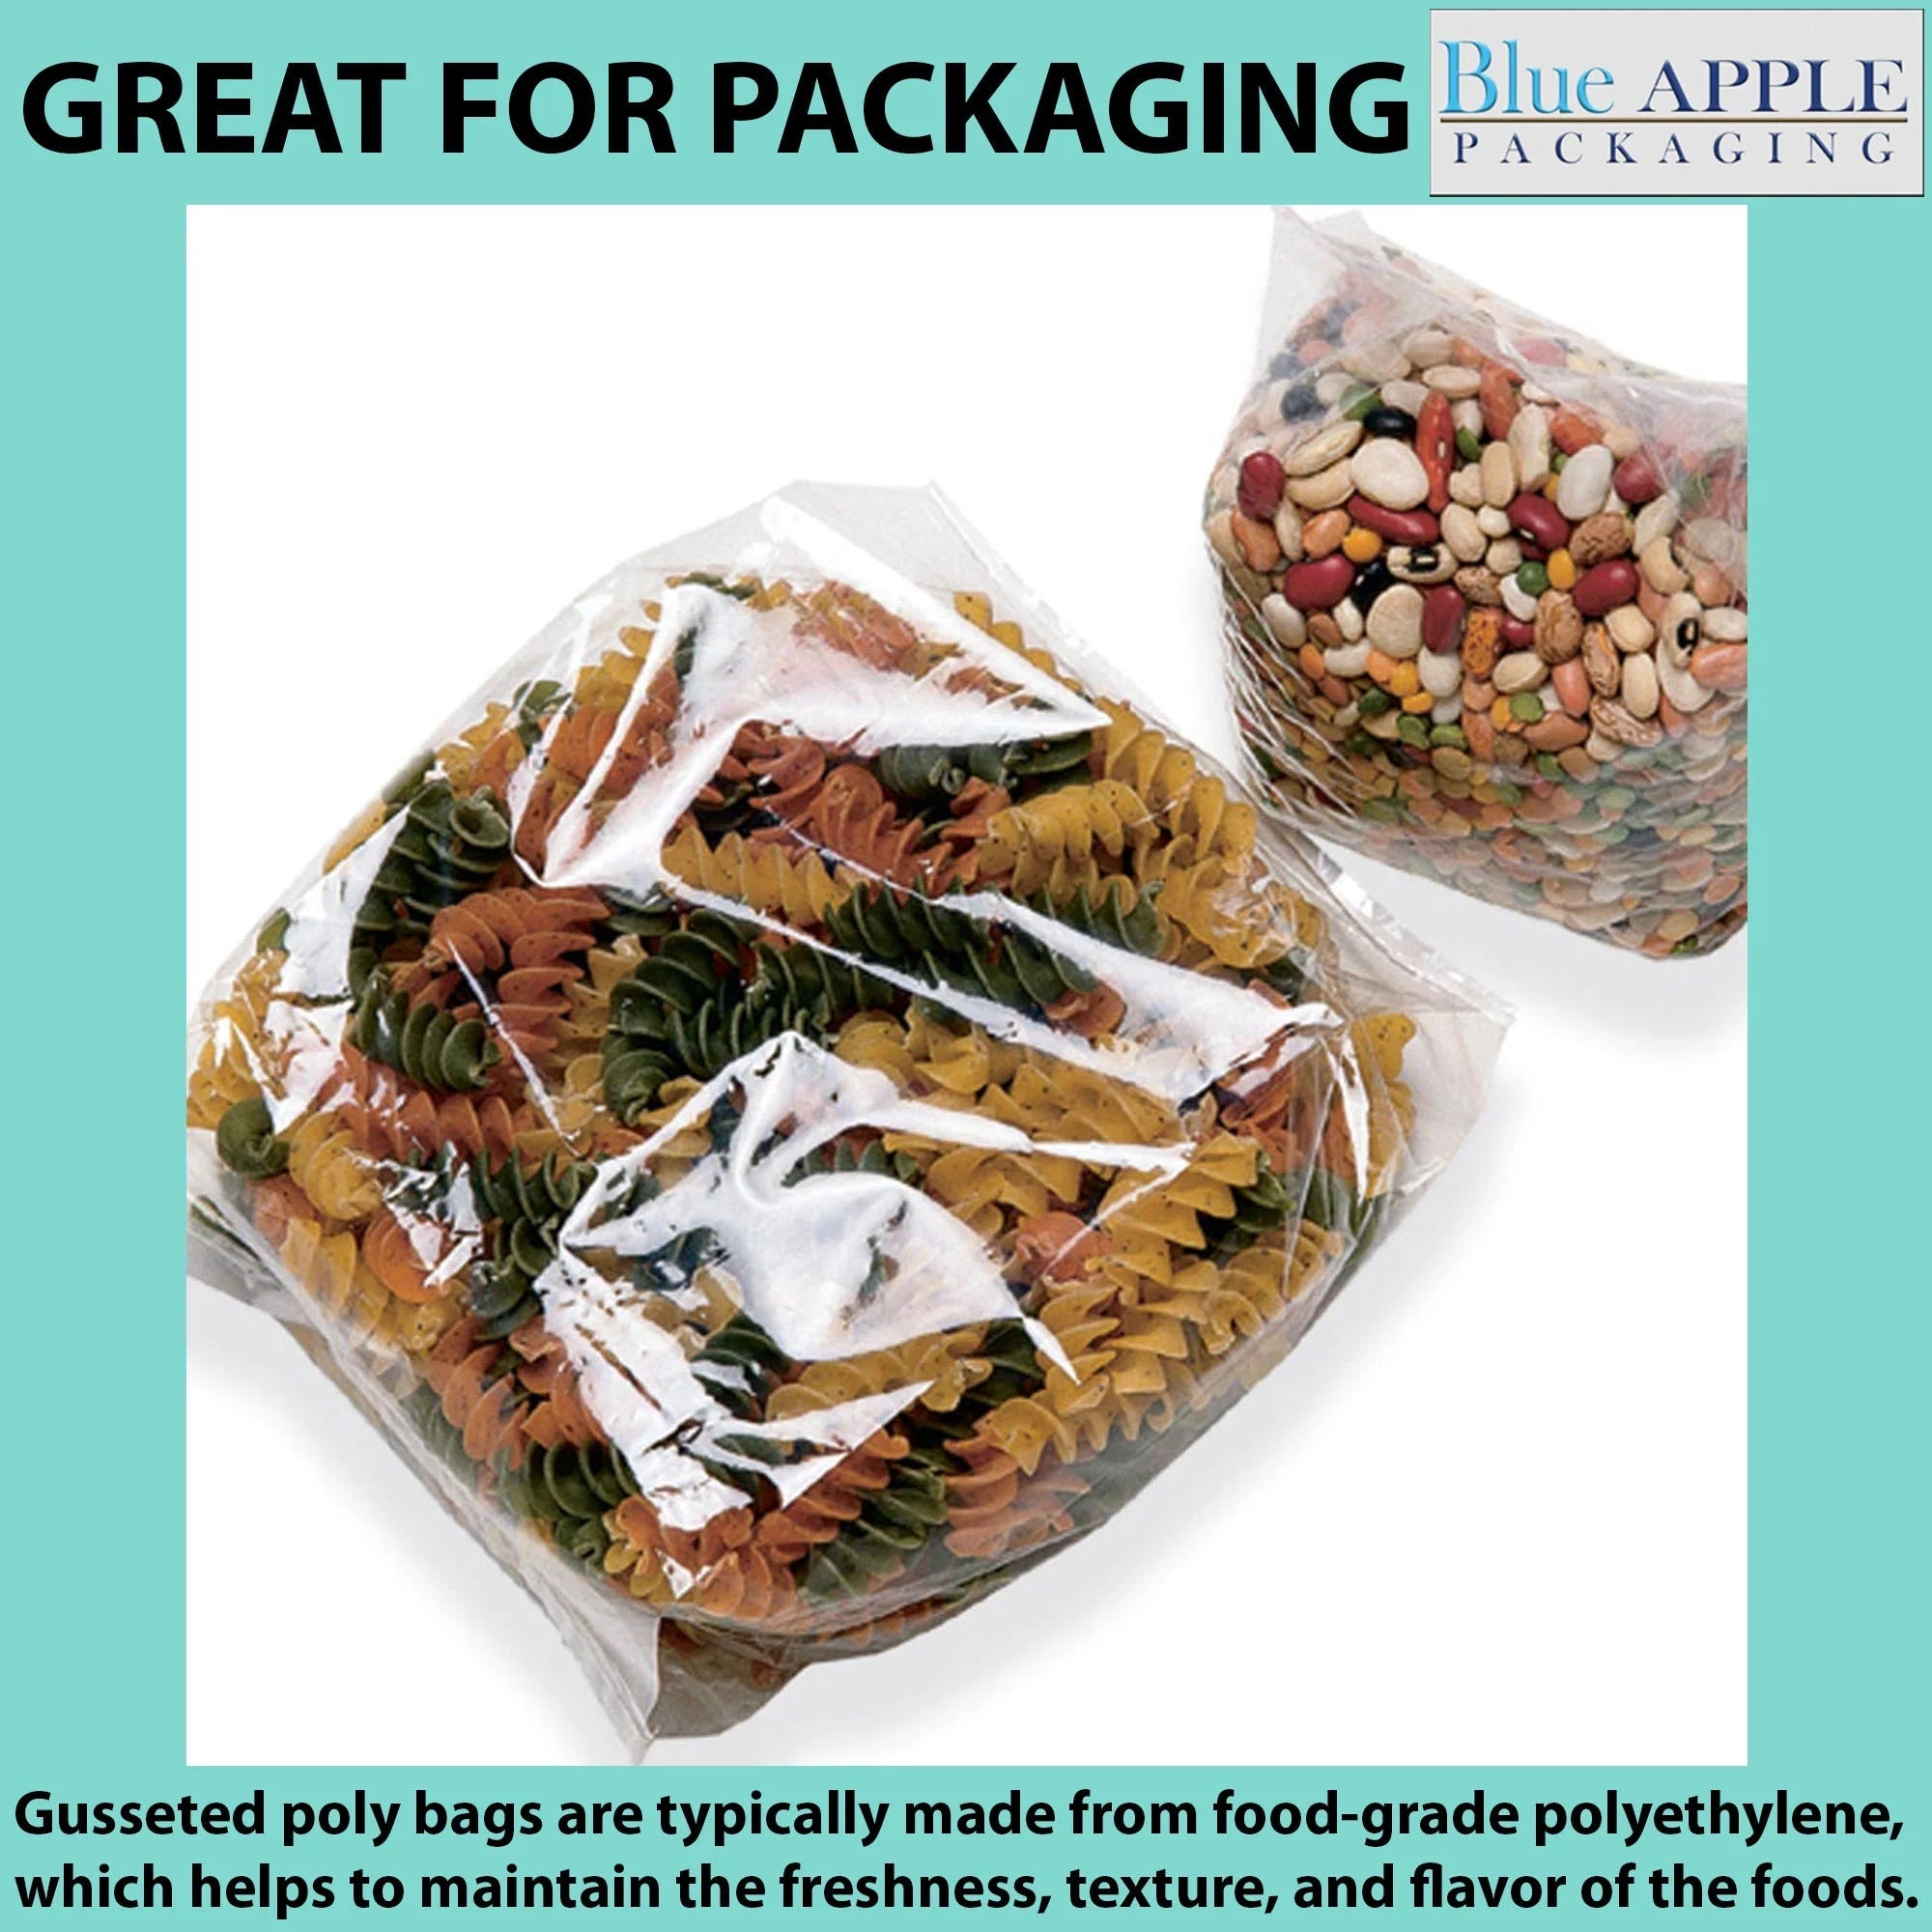 Gusseted Polypropylene Bags 1.5 Mil 5 inch X 4.5 inch X 15 inch Size